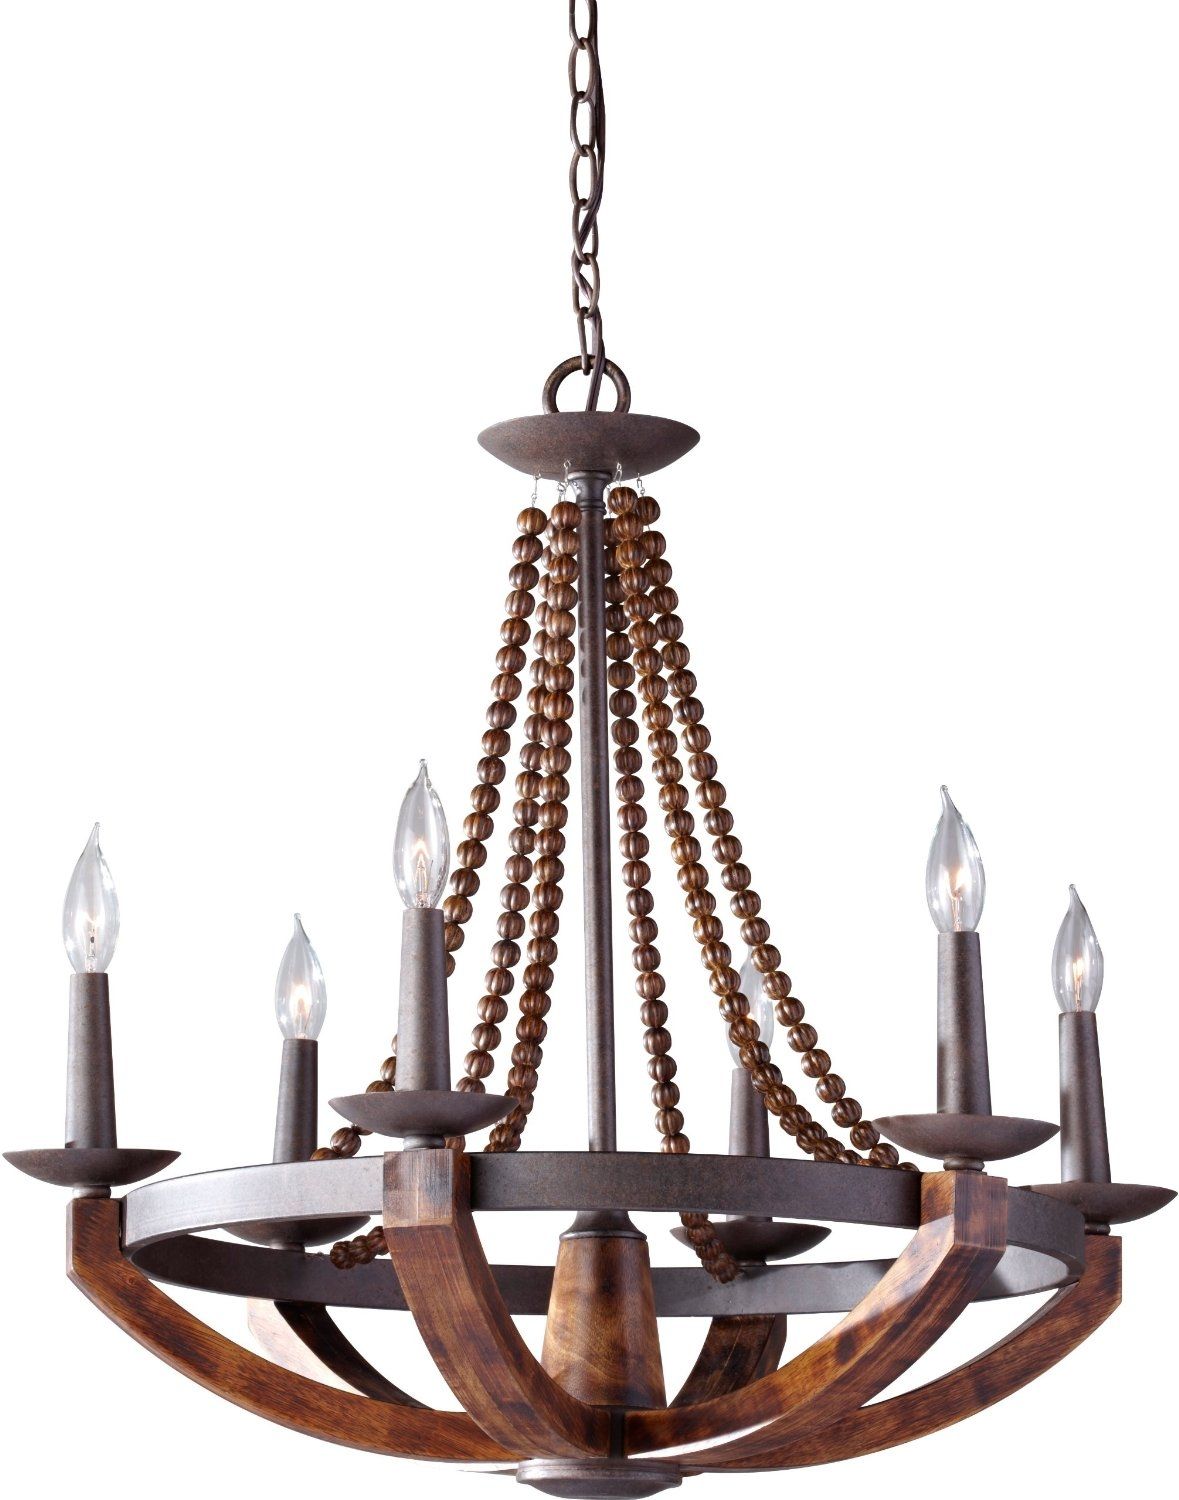 12 Best Rustic Wood And Metal Chandeliers Qosy Throughout Wooden Chandeliers (Photo 5 of 12)